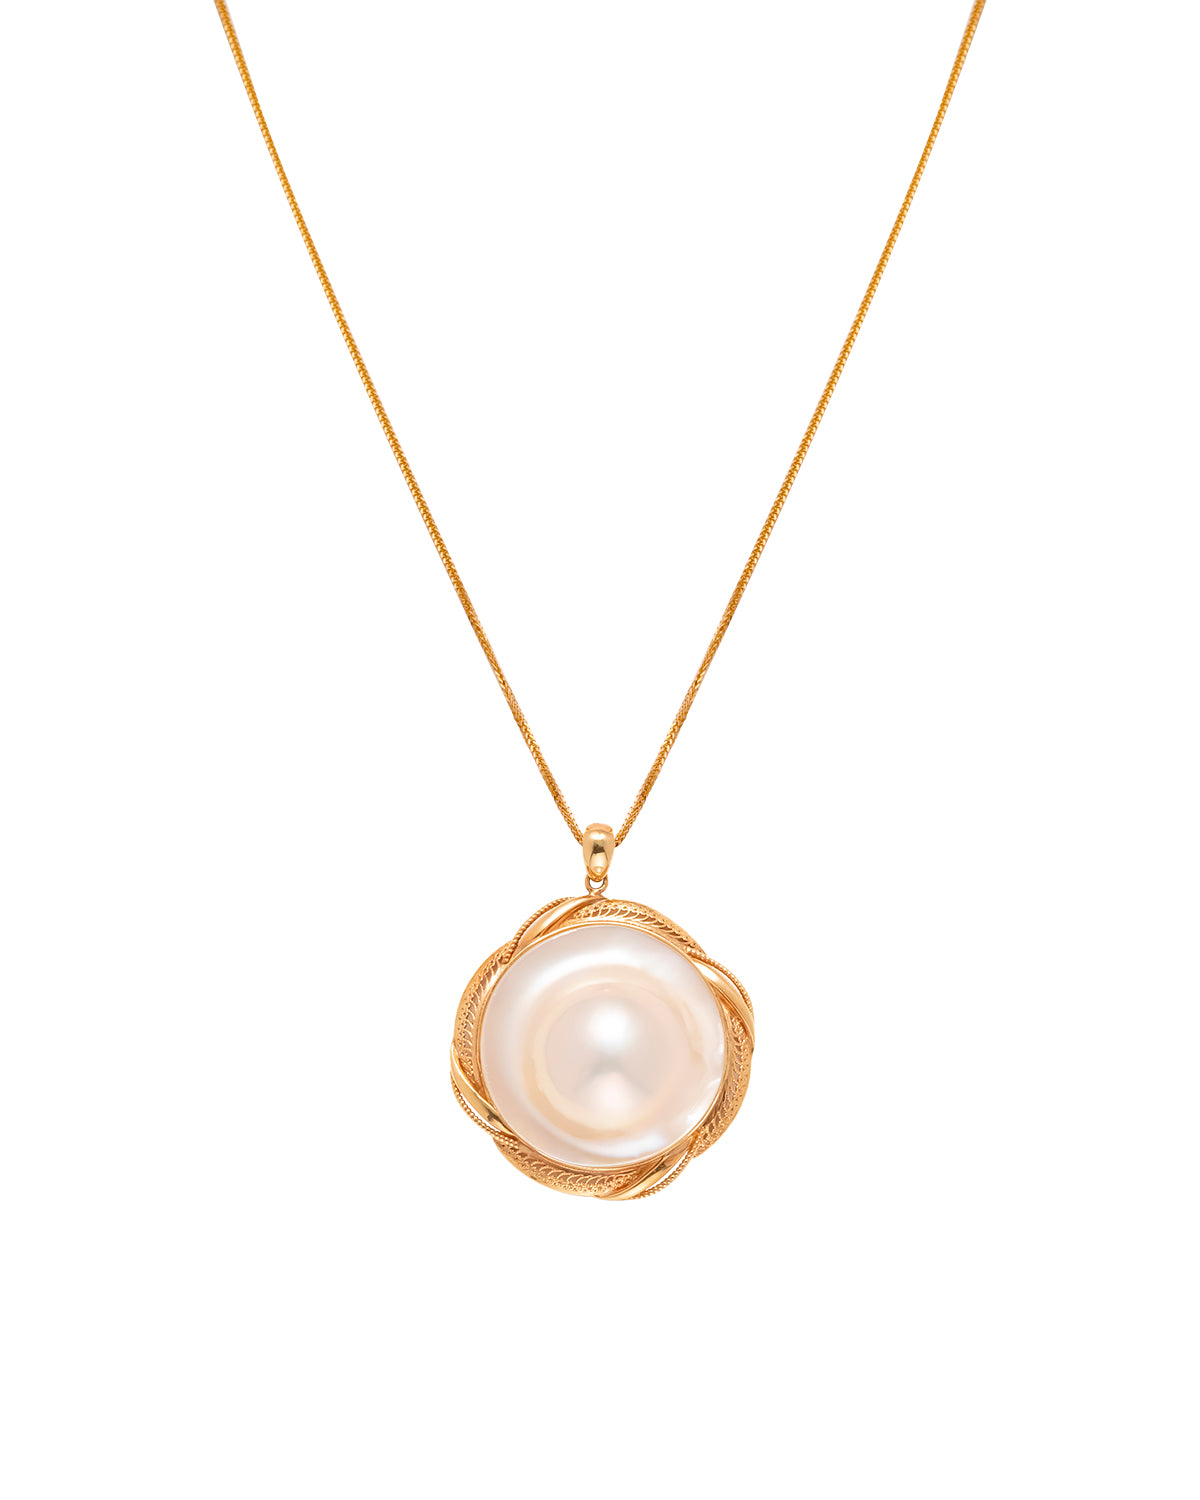 22-23mm Japanese Seawater Mabe Pearl Planet Pendant